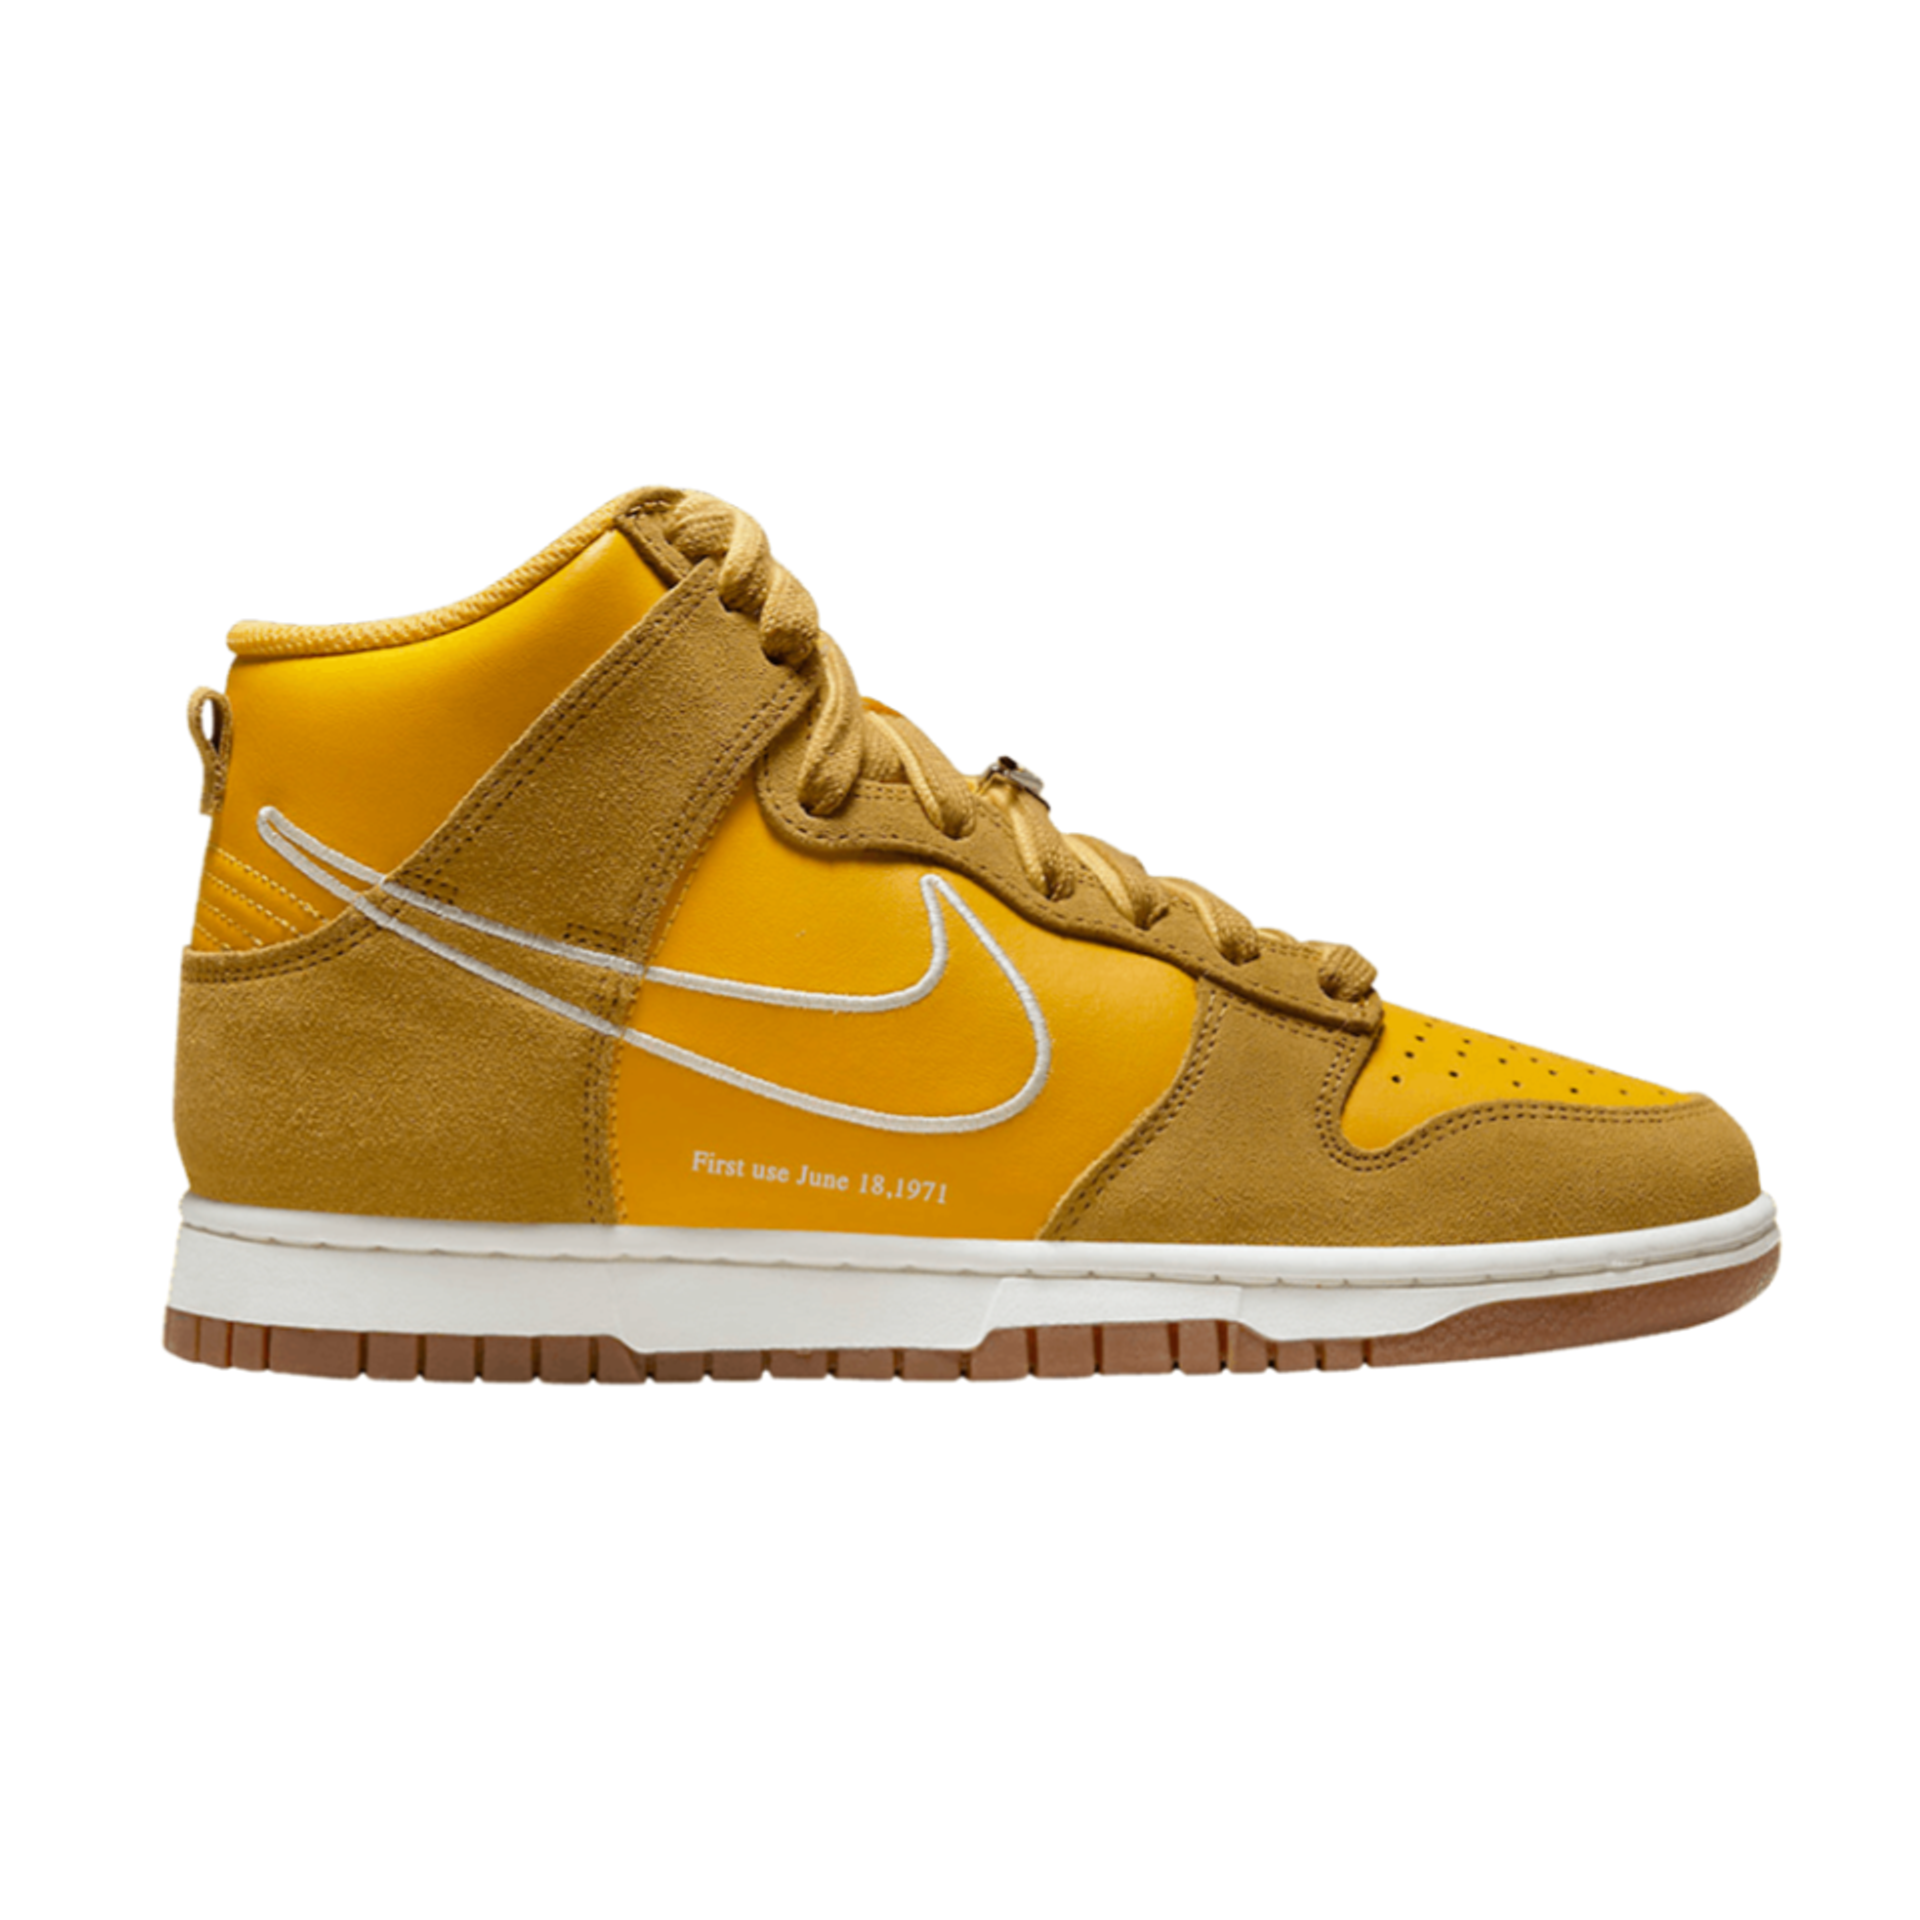 Nike Wmns Dunk High SE 'First Use Pack - University Gold'